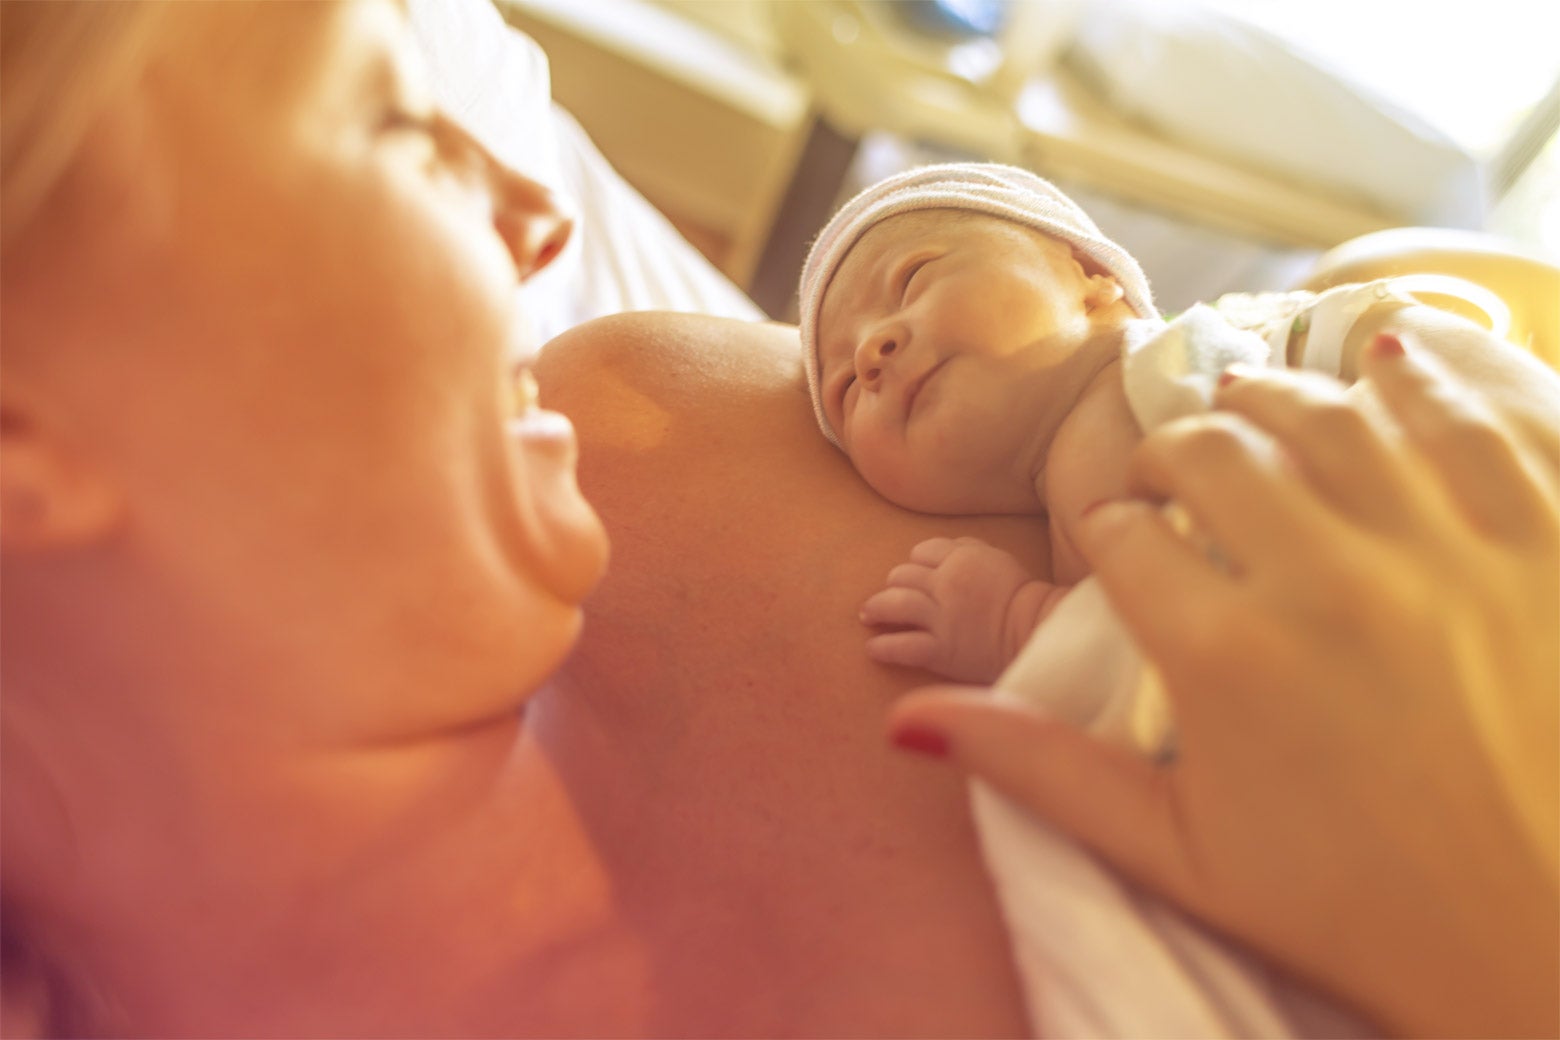 A mother holds a newborn baby in the hospital.